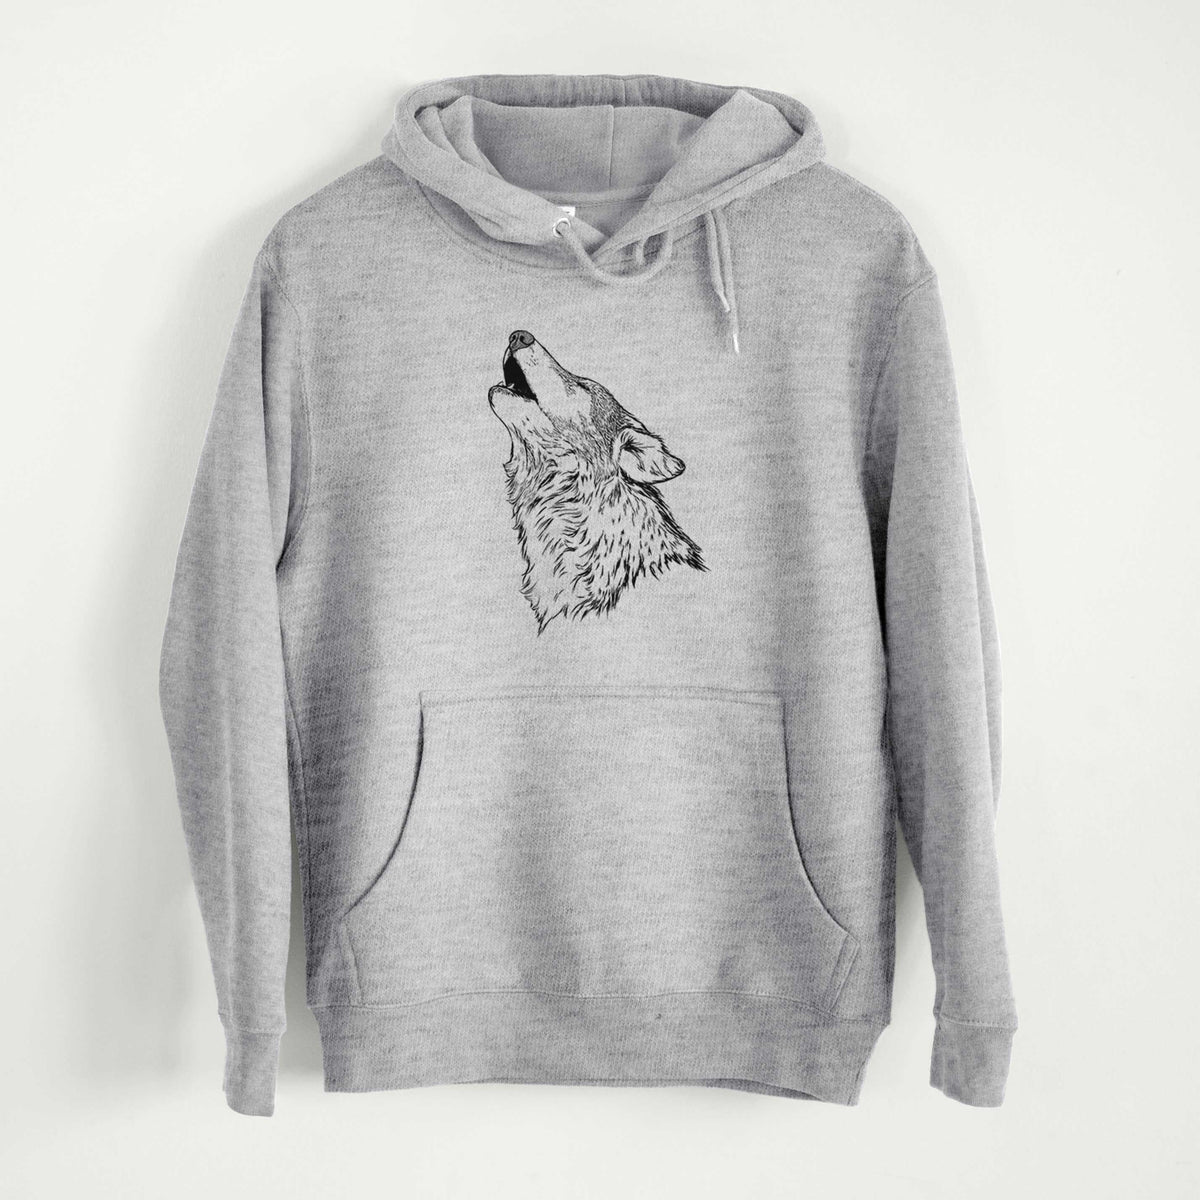 Canis lupus - Grey Wolf Howling  - Mid-Weight Unisex Premium Blend Hoodie